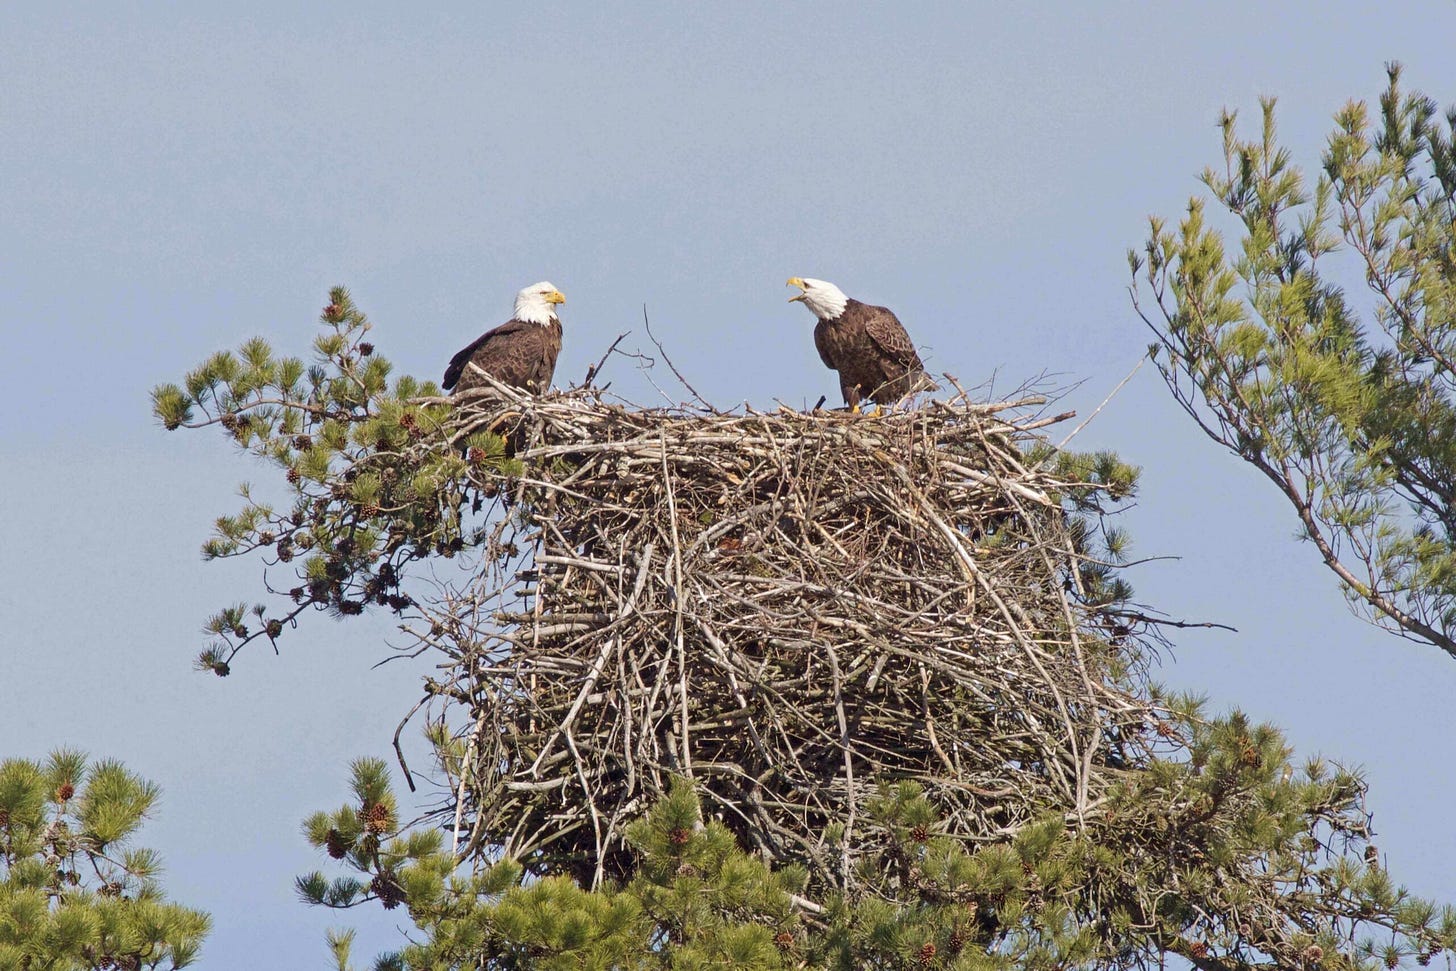 Bald eagles in a big nest